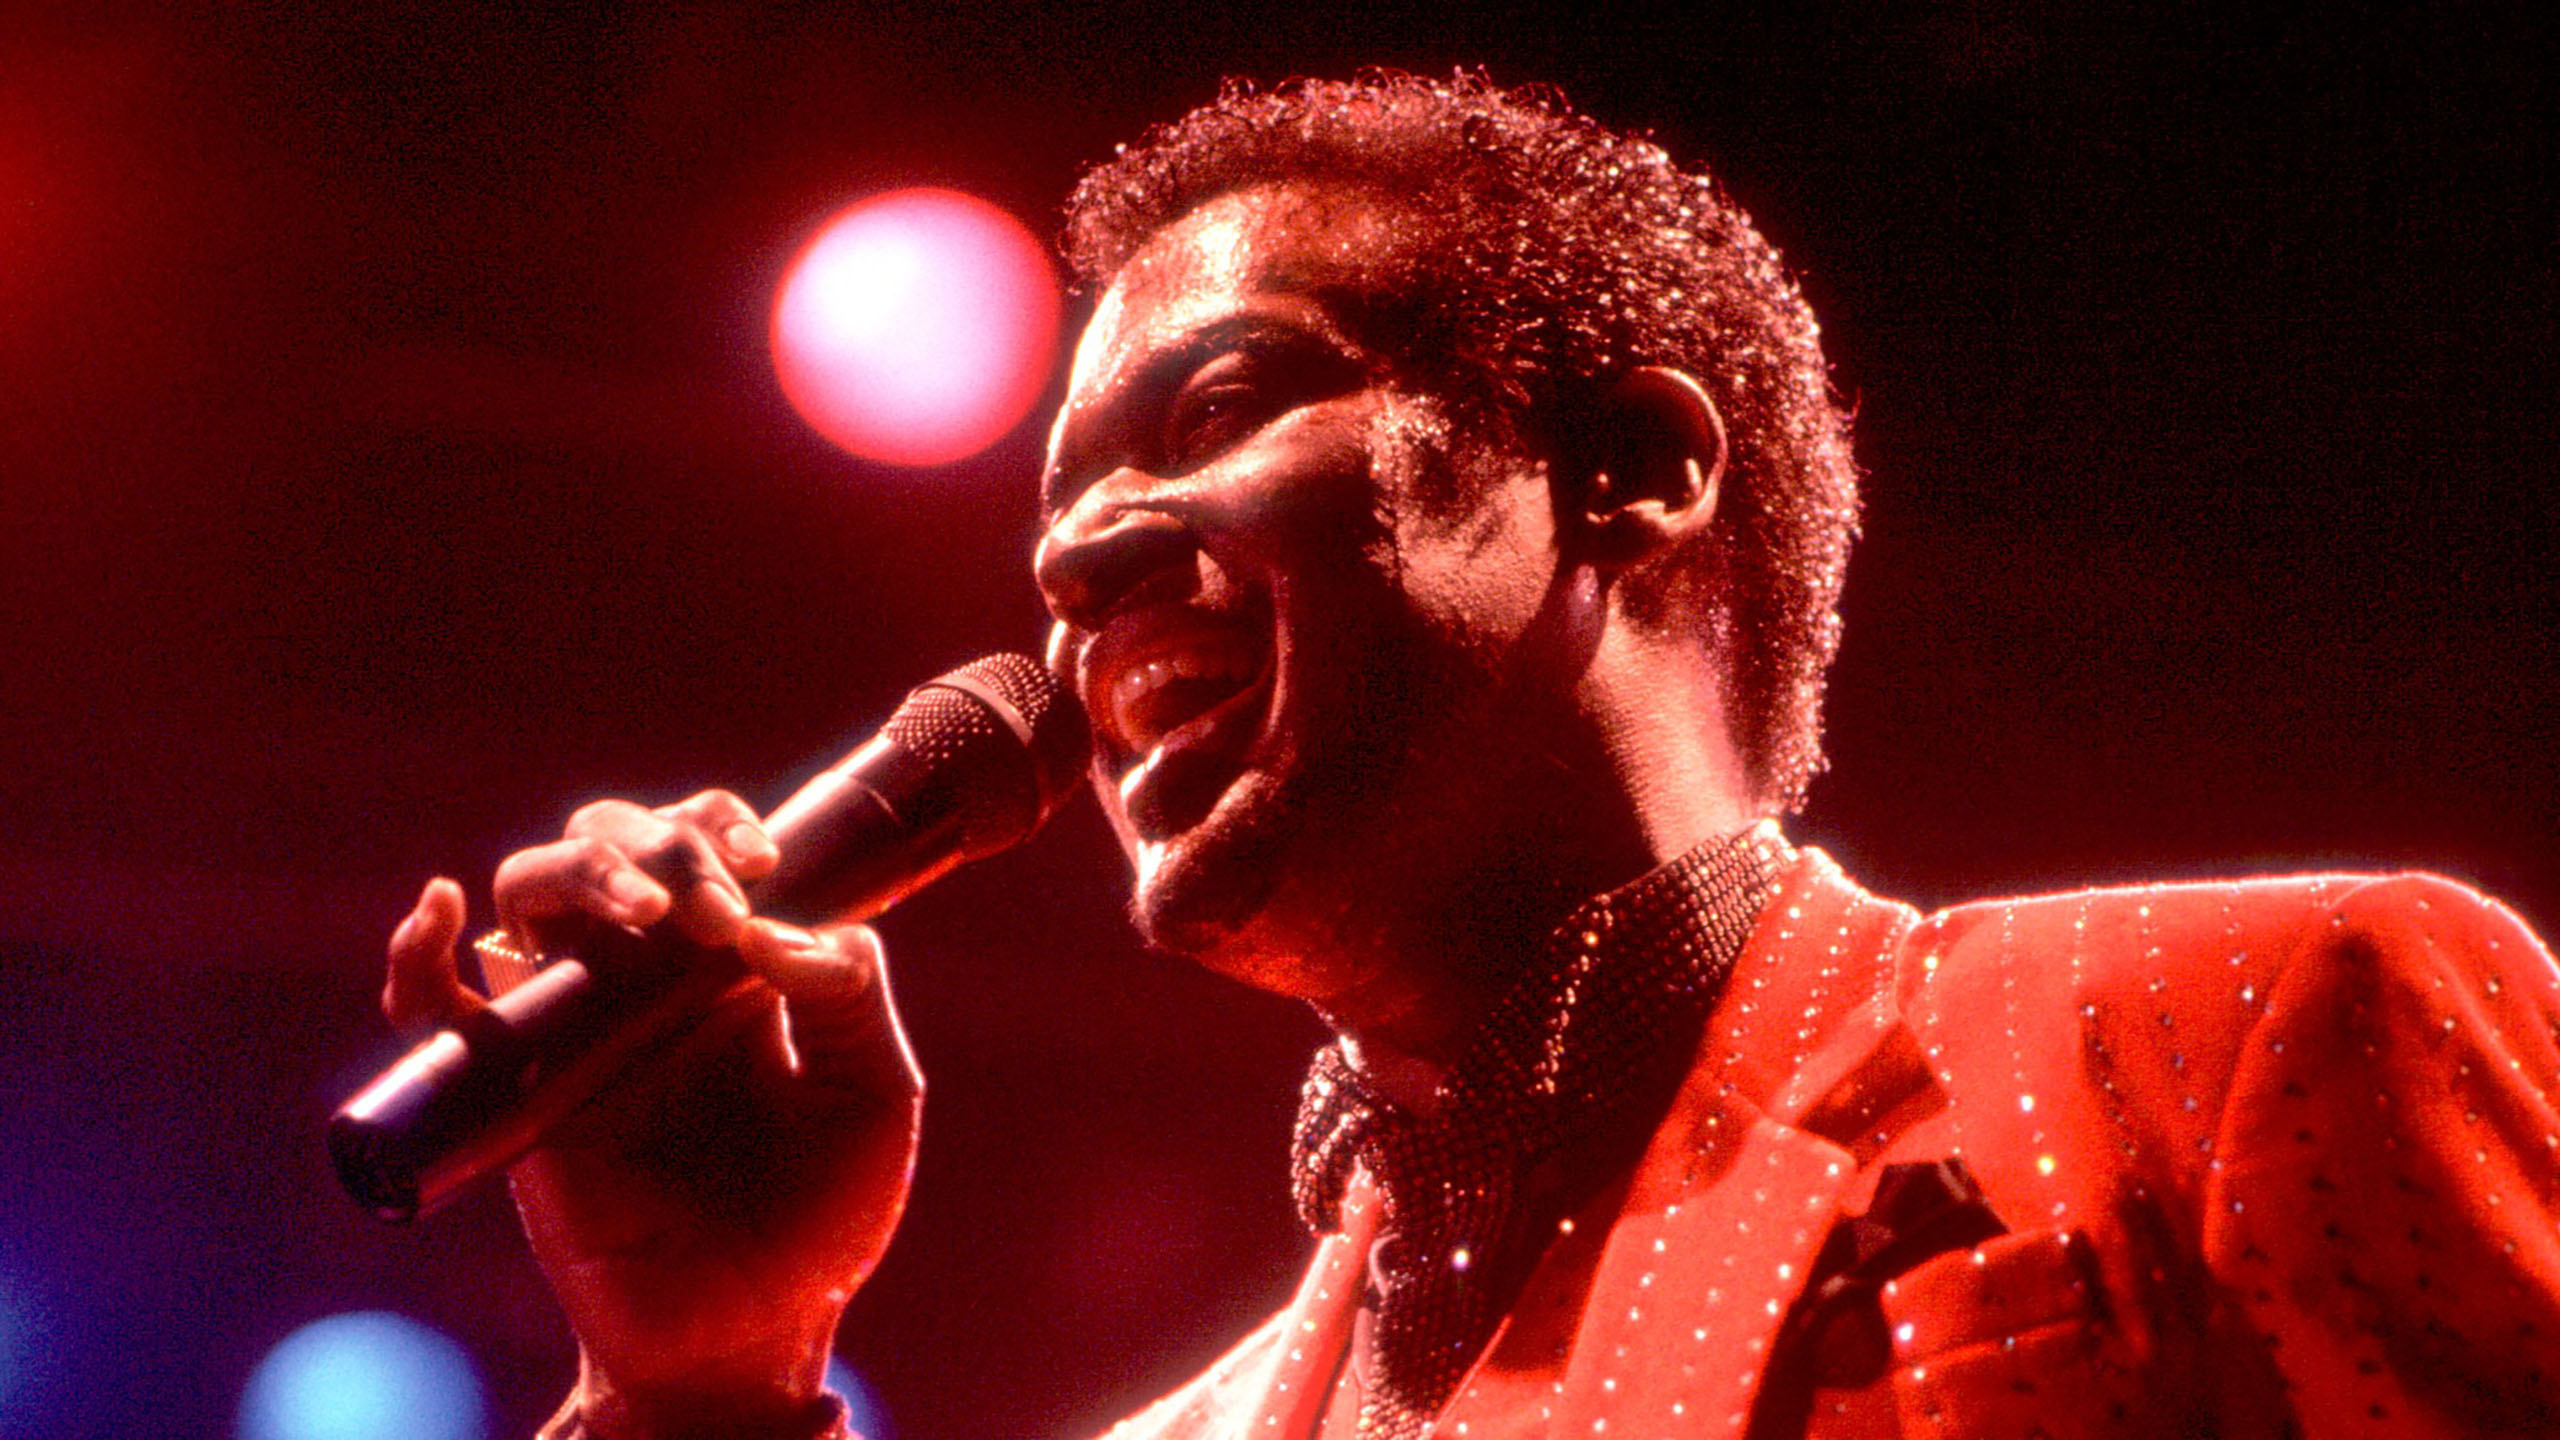 A film still from Luther: Never Too Much that shows Luther Vandross singing into a microphone in red-tinted lighting.